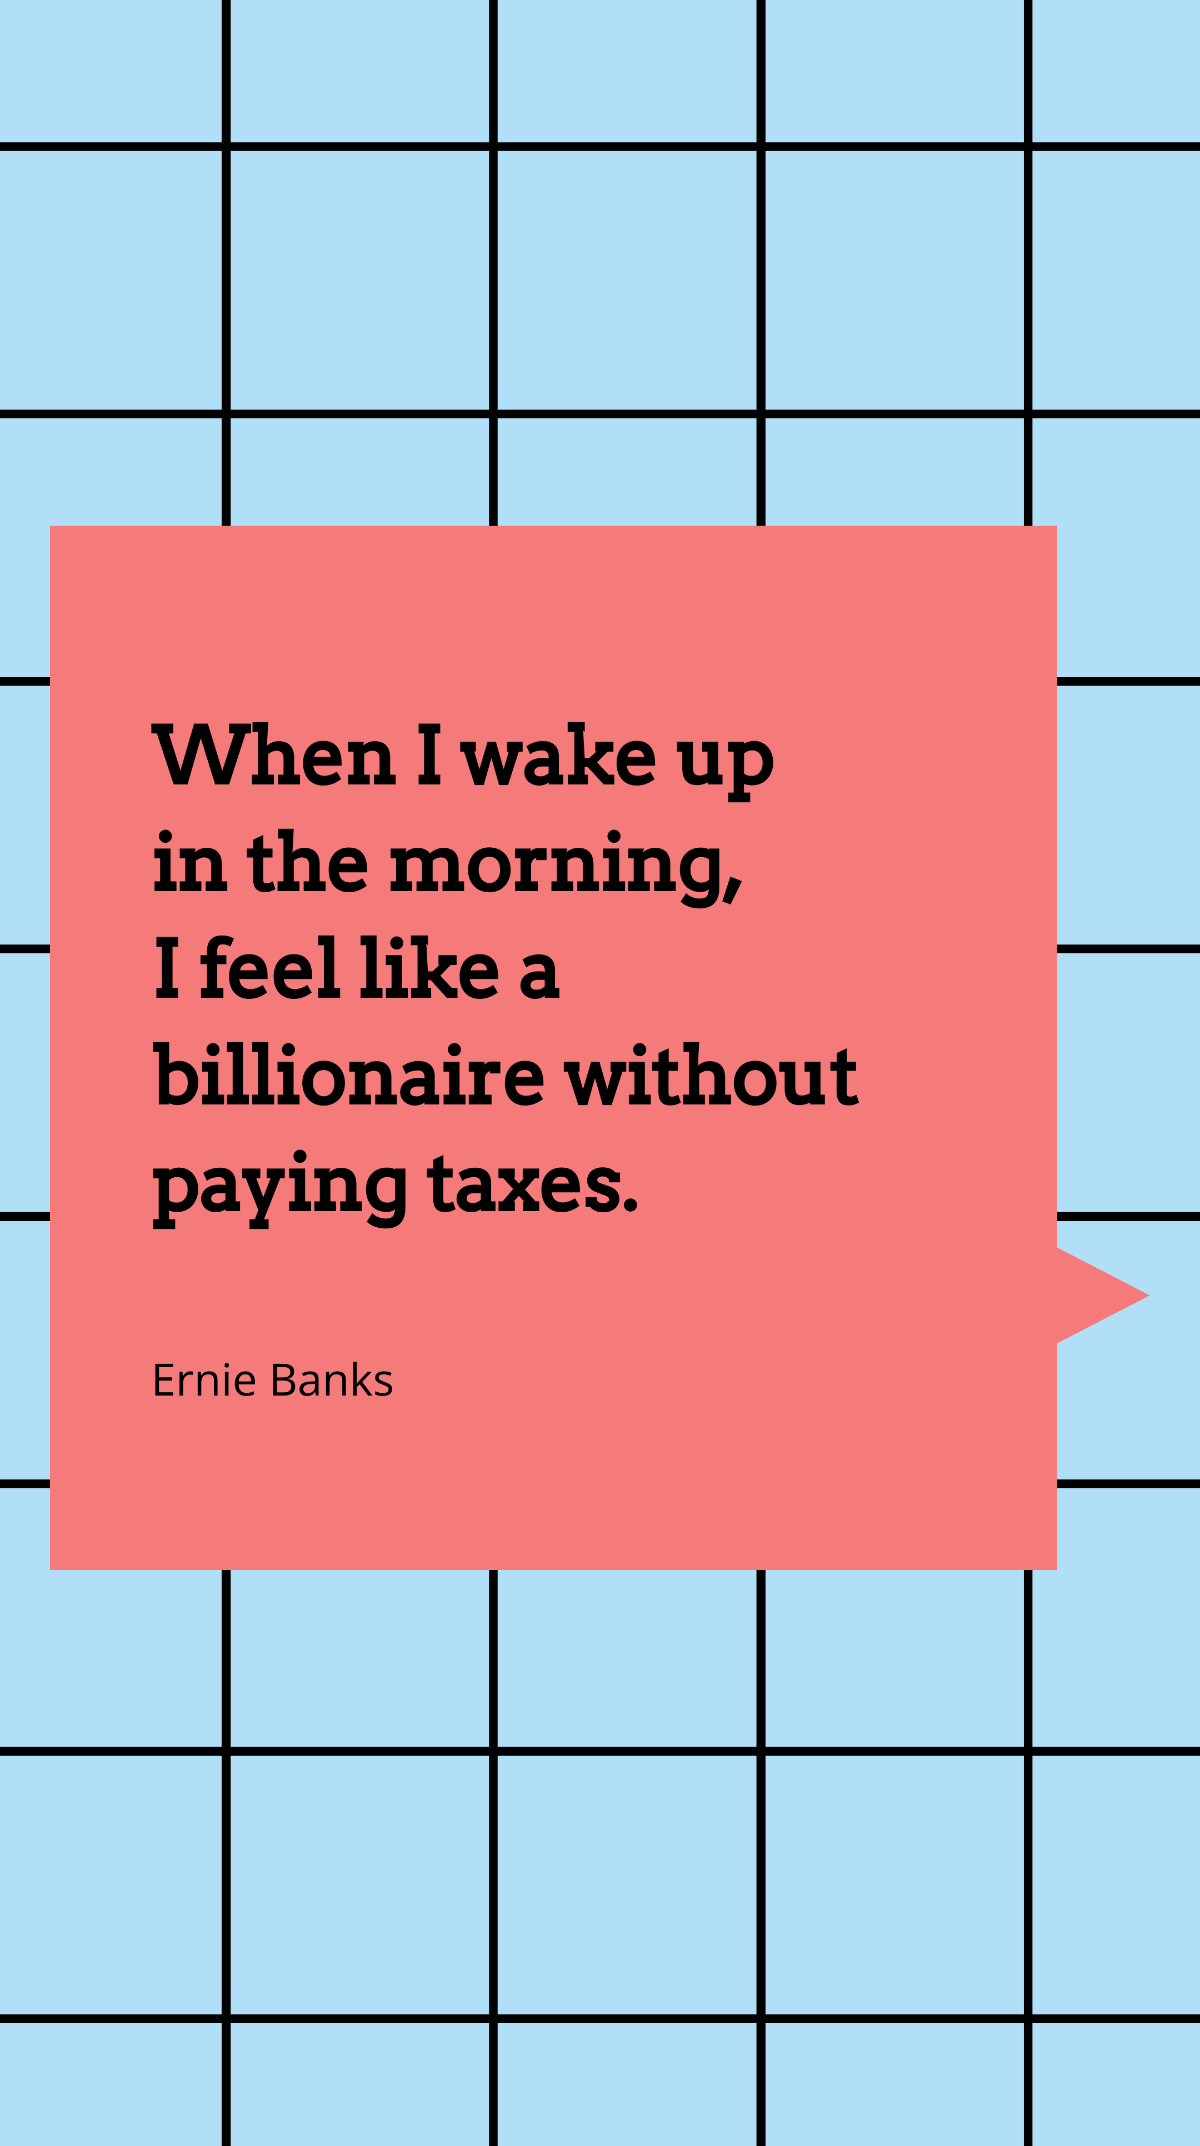 Ernie Banks - When I wake up in the morning, I feel like a billionaire without paying taxes. Template